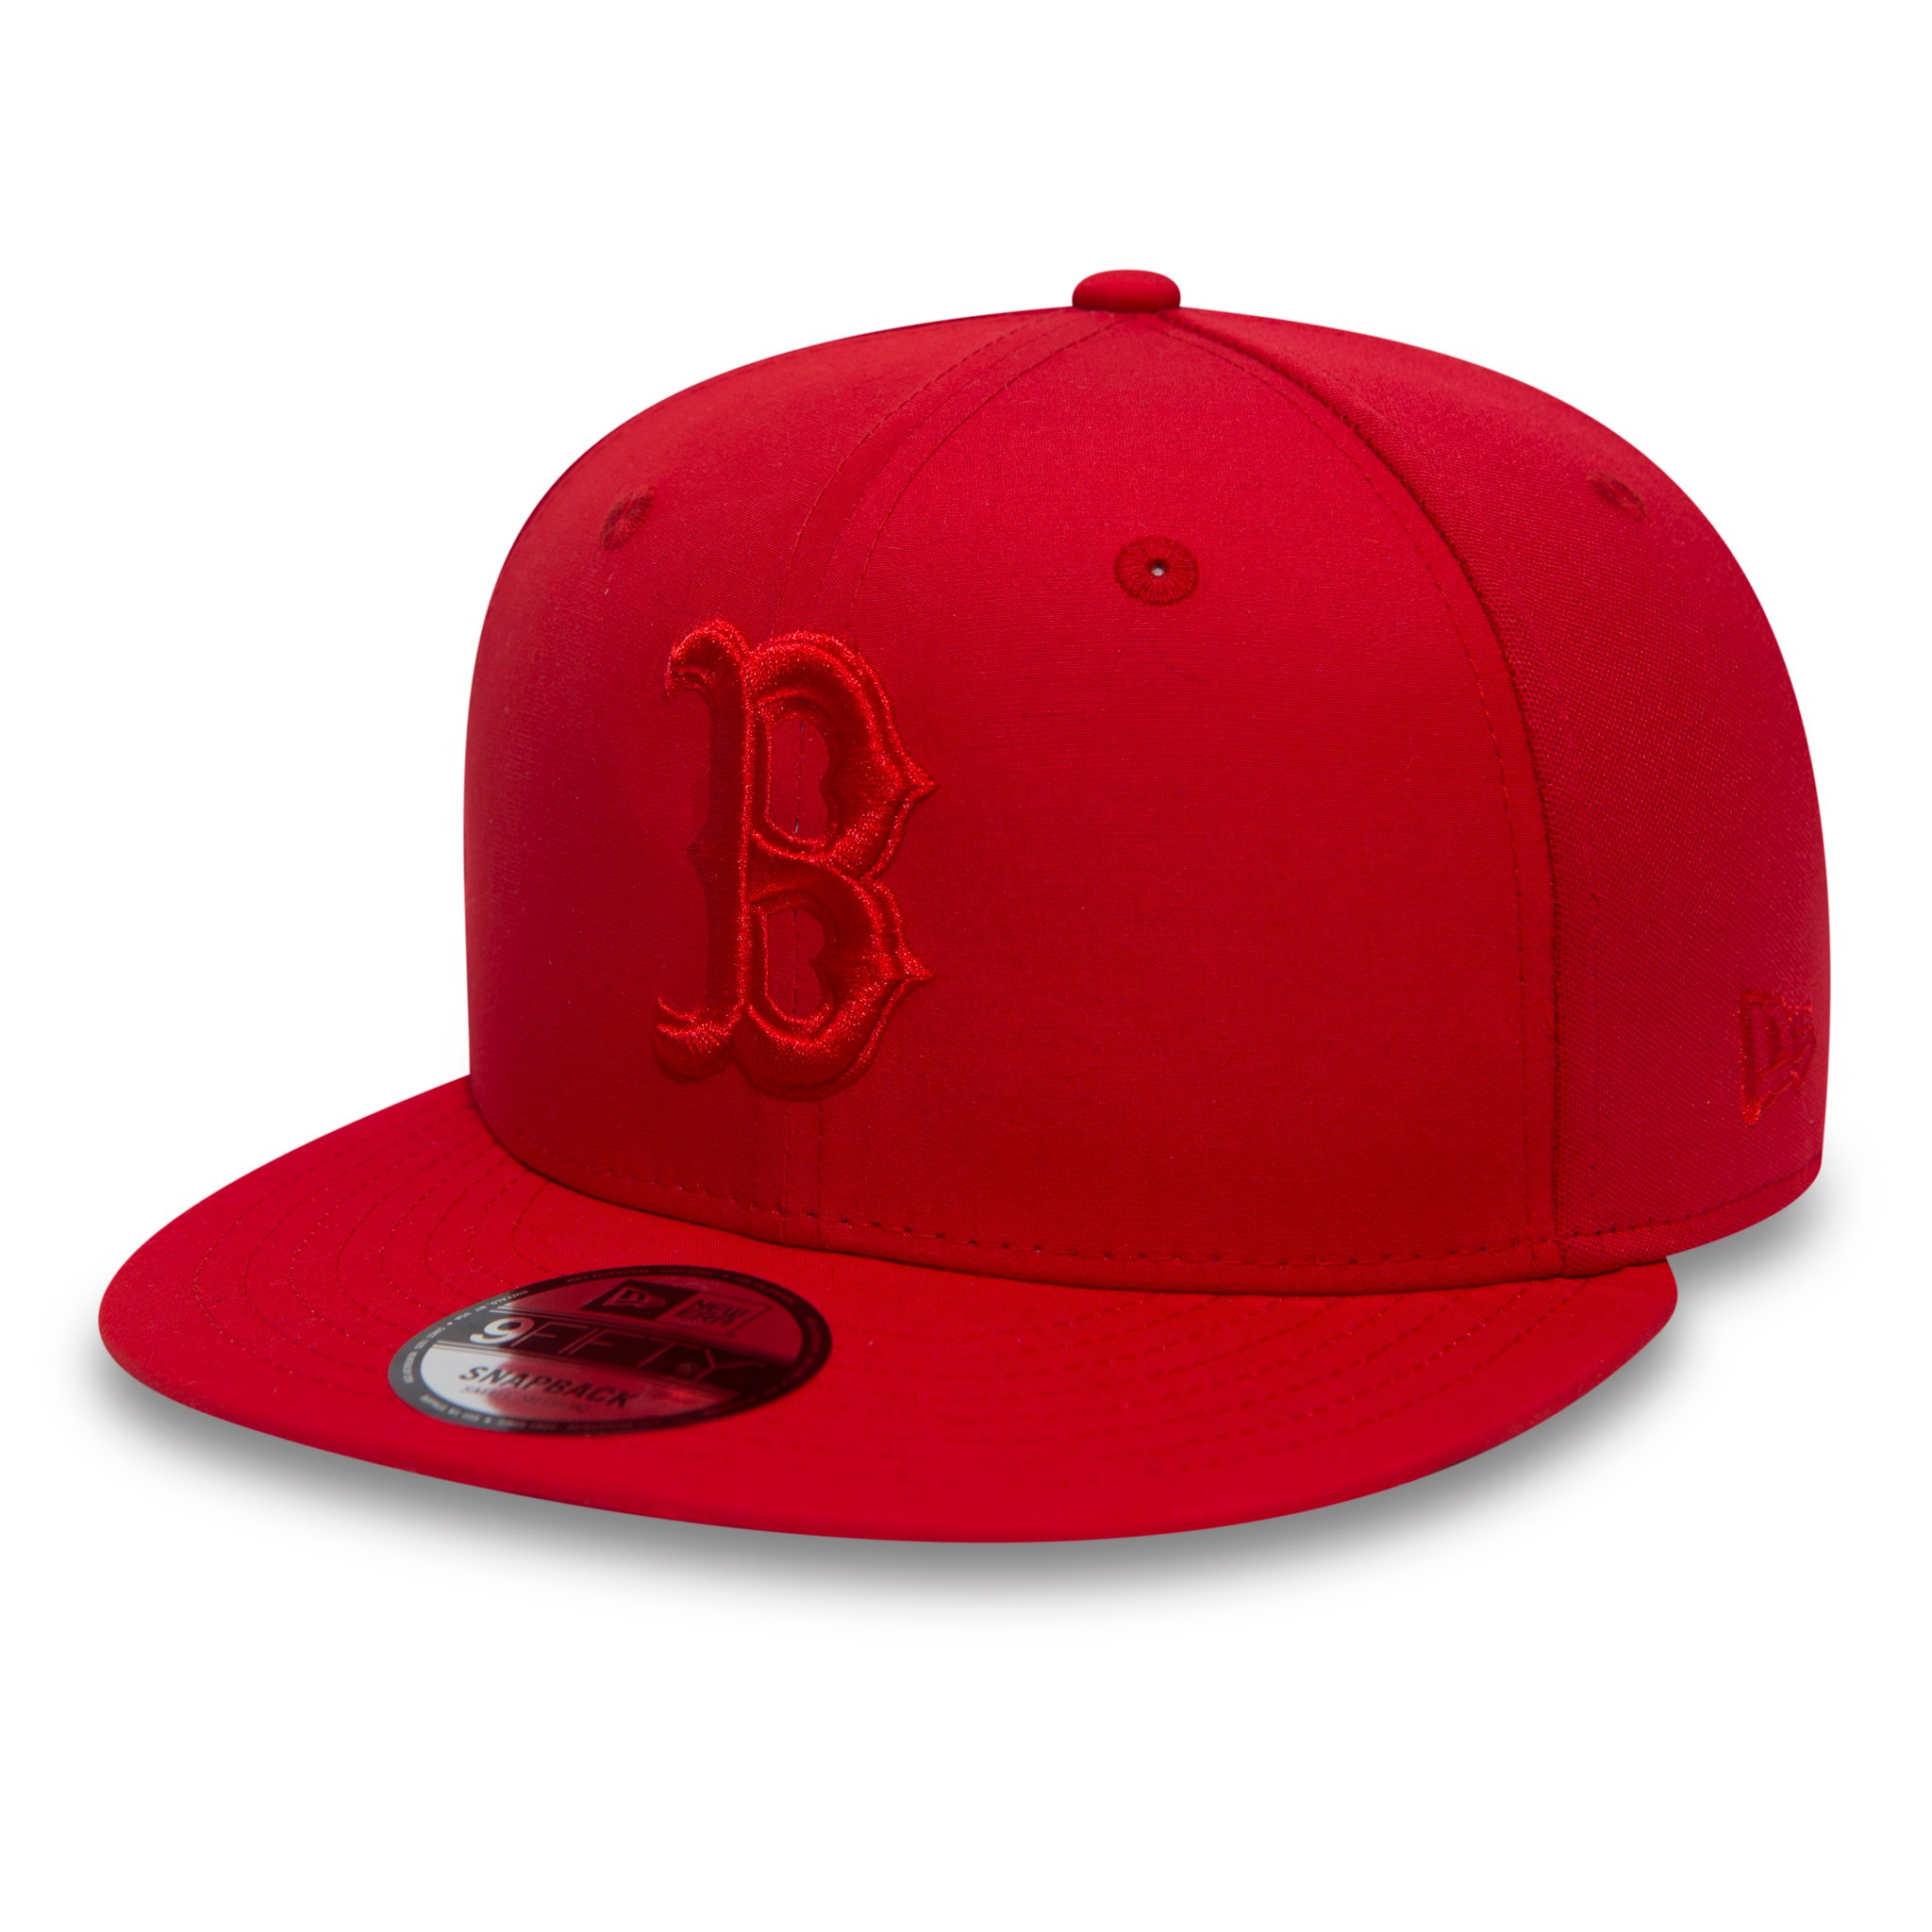 Boston Red Sox 9FIFTY-Kappe in Scharlachrot